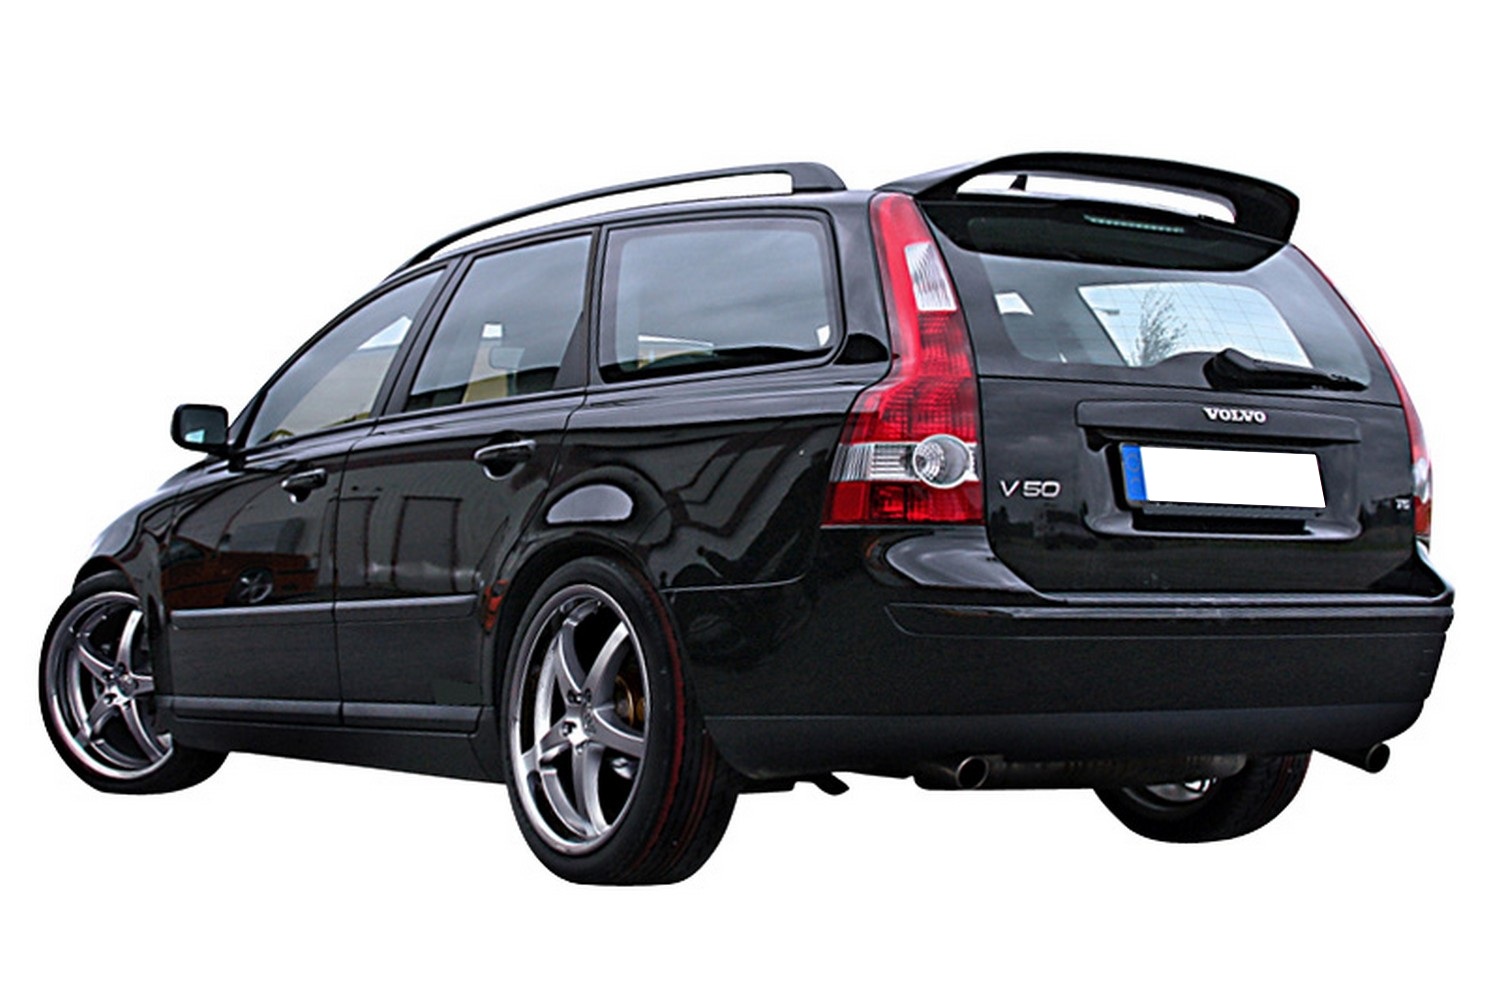 Roof spoiler suitable for Volvo V50 2004-2012 wagon